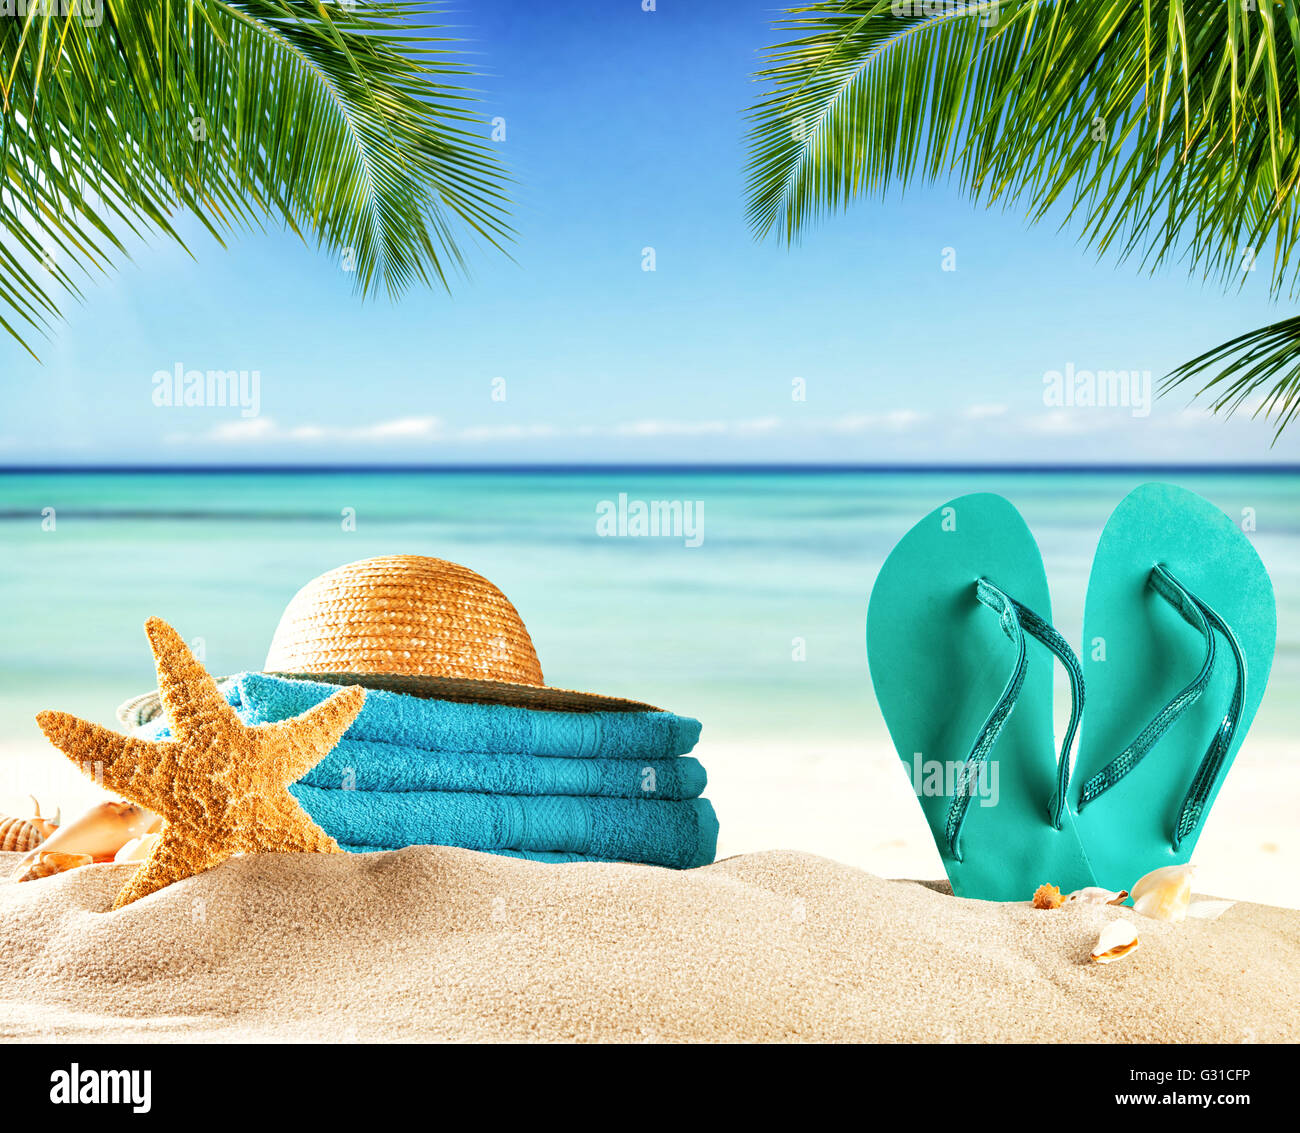 Summer accessories on sandy beach, blur sea on background. Summer exotic relaxation concept Stock Photo